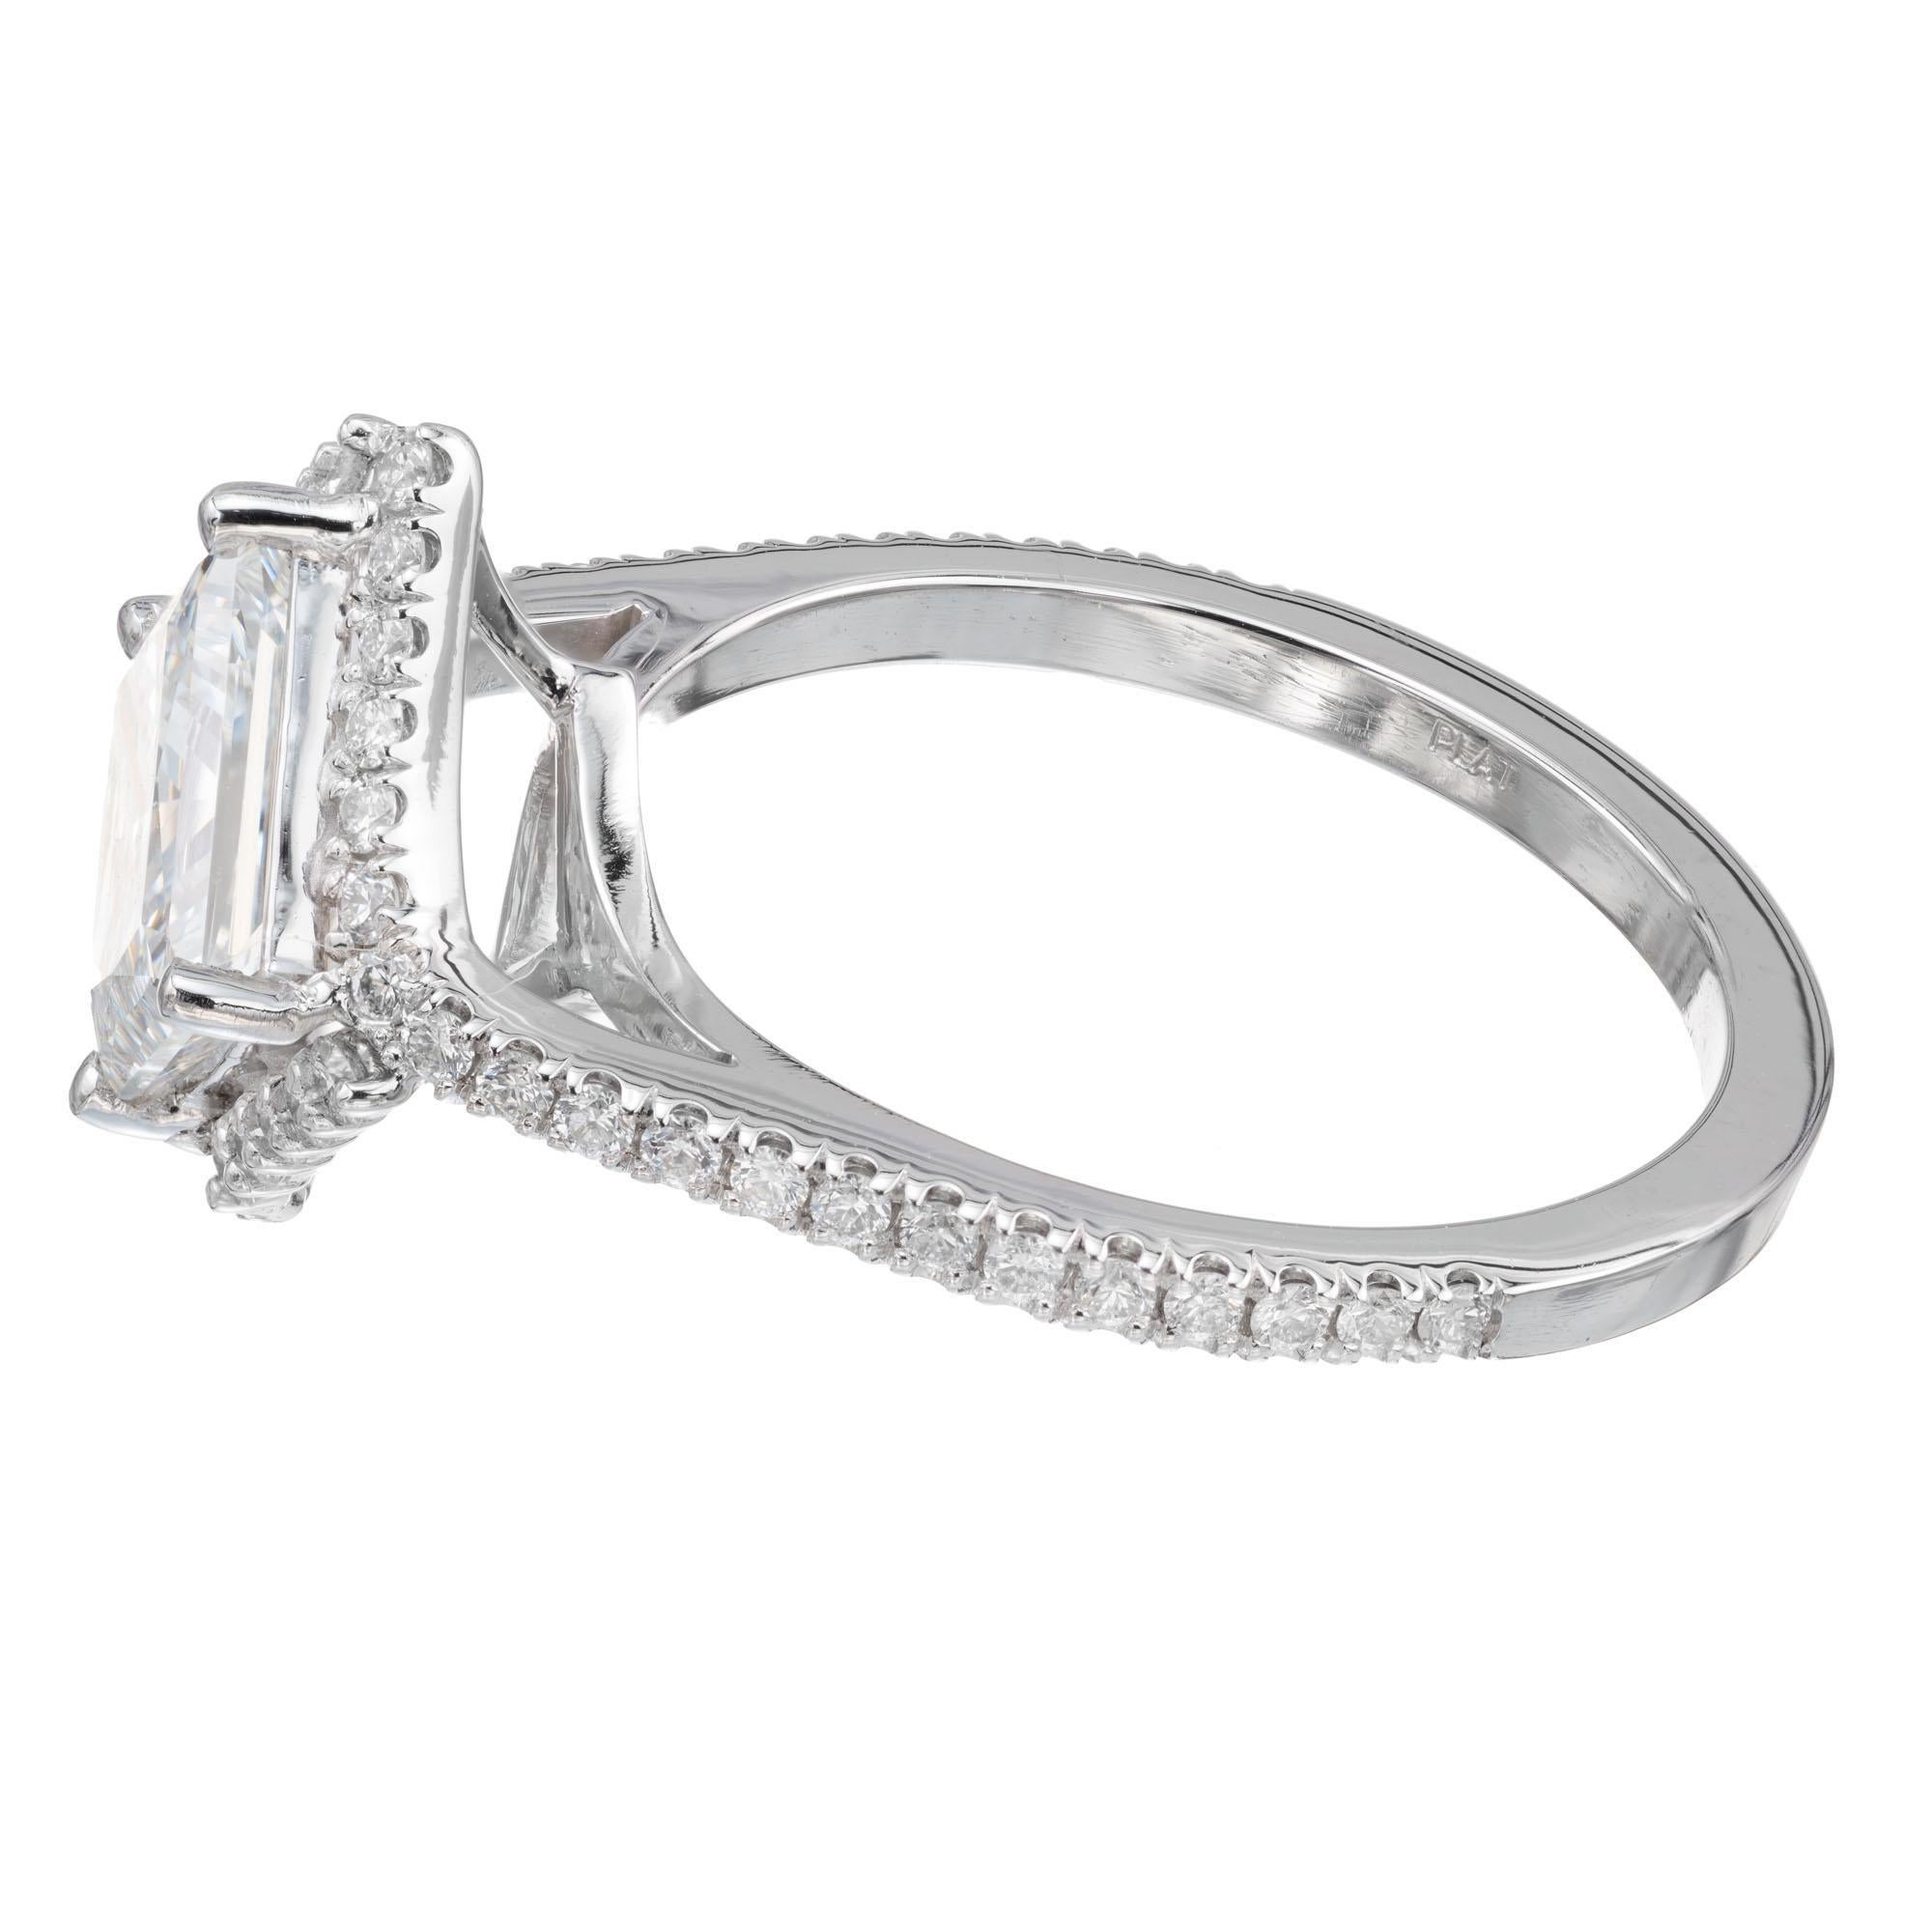 Peter Suchy GIA Certified 1.95 Carat Diamond Platinum Engagement Ring For Sale 2